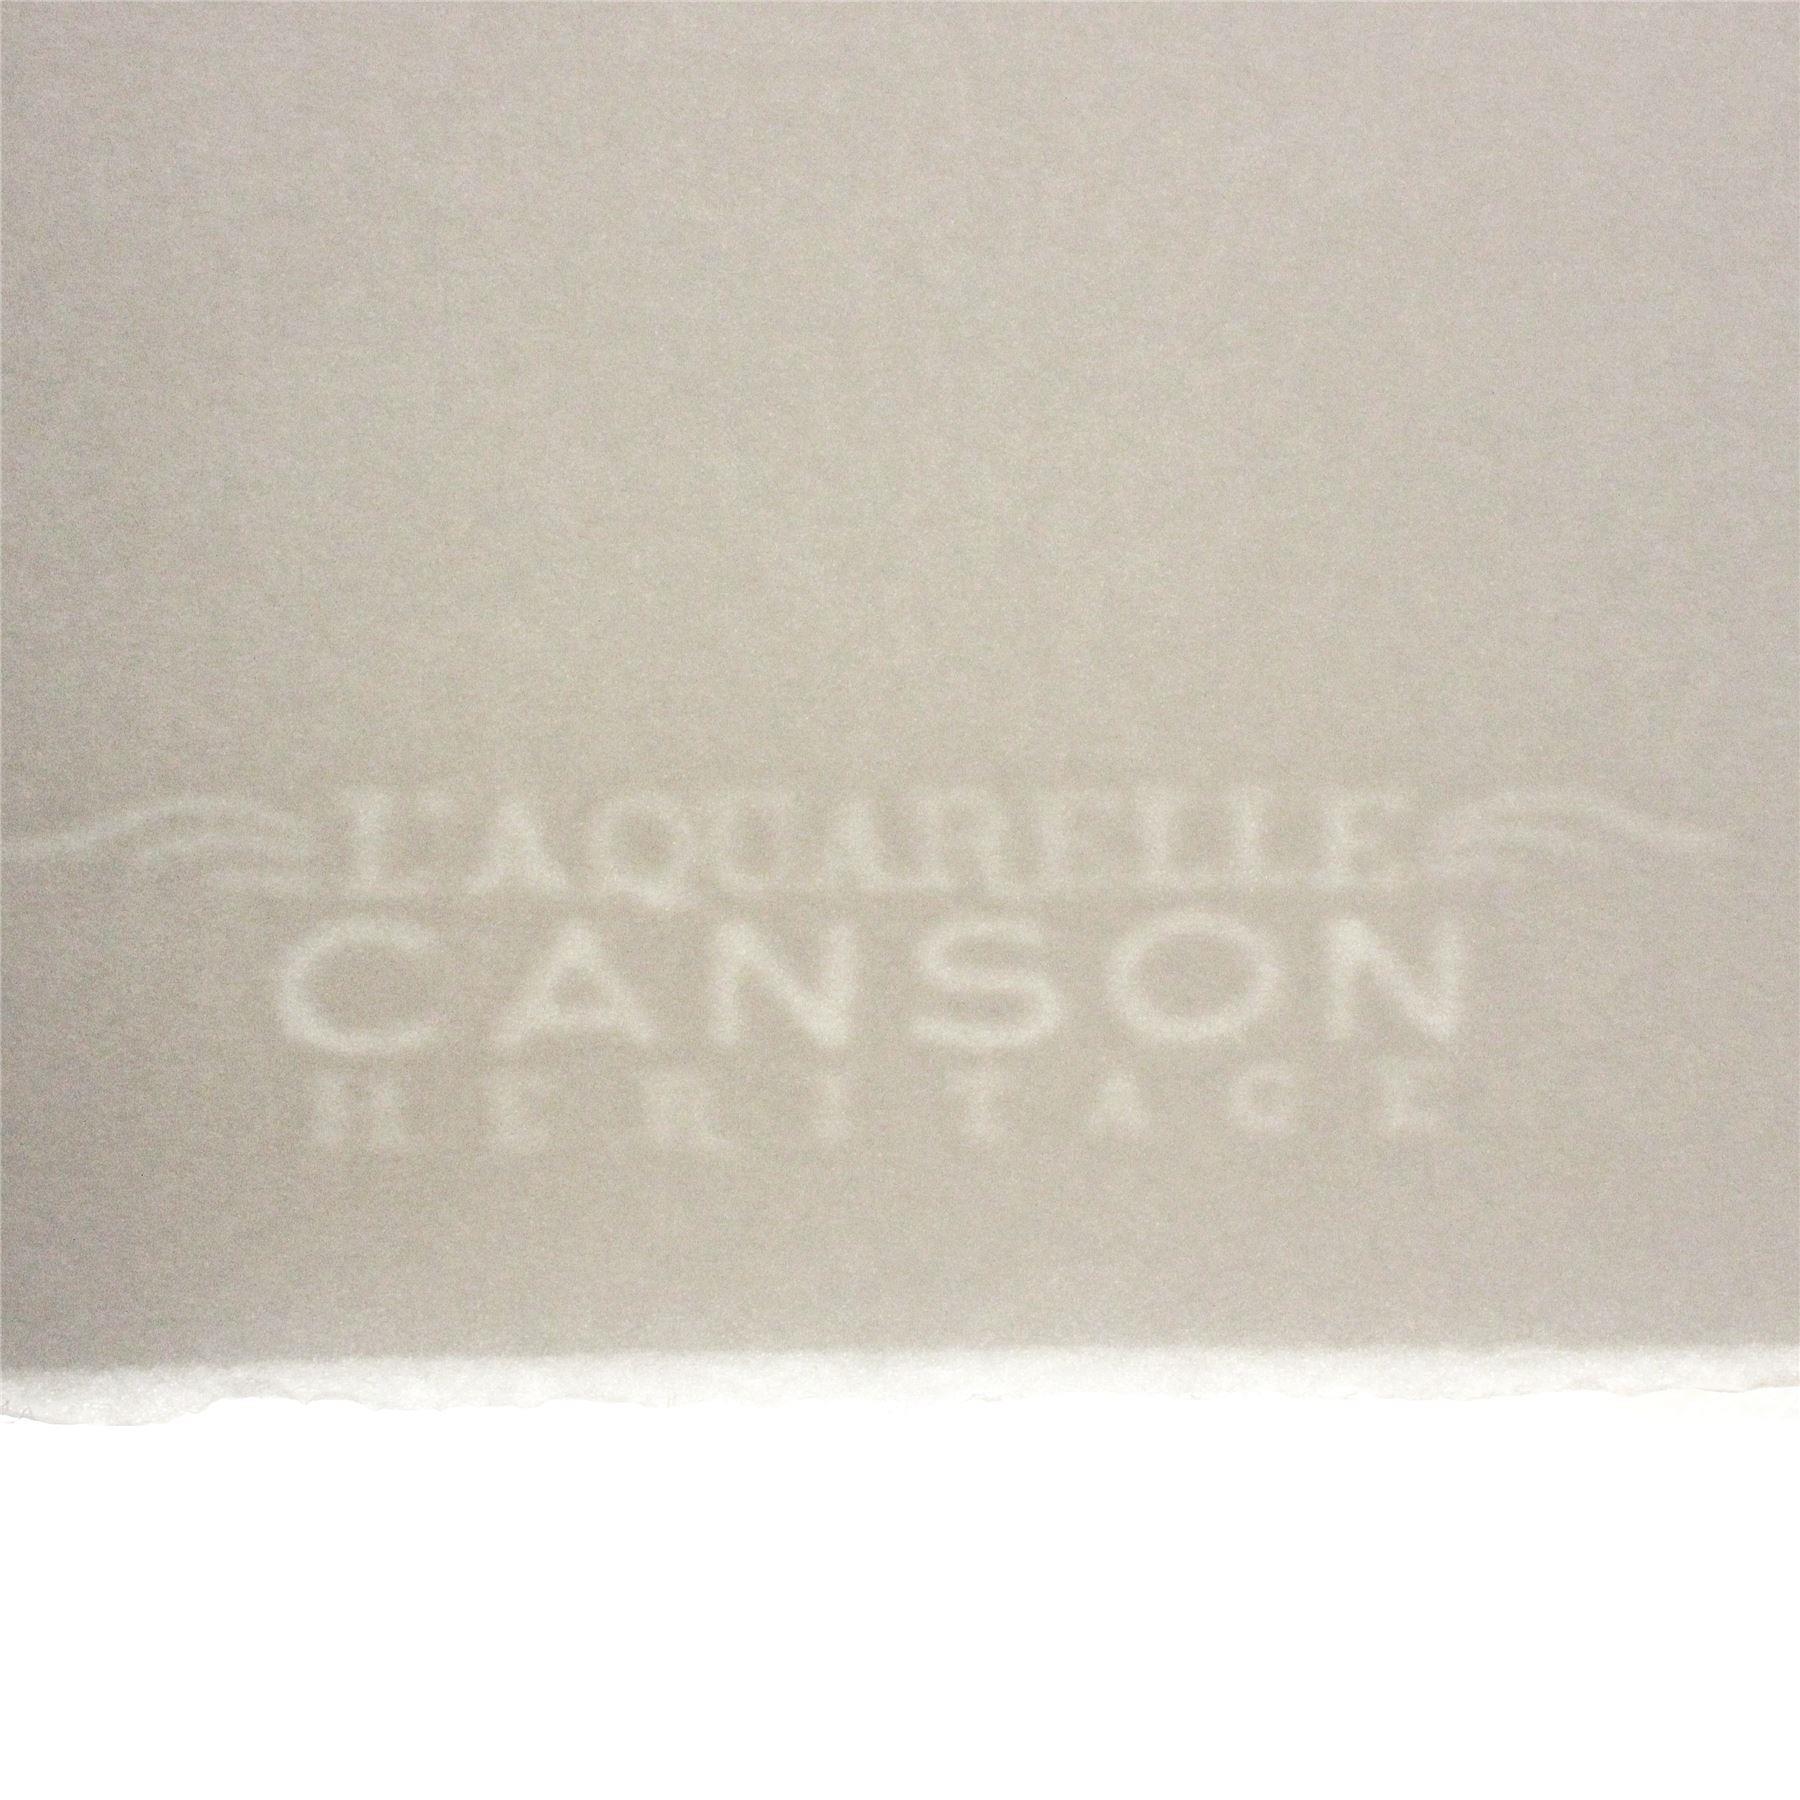 Watermark of Canson L'Aquarelle Heritage watercolour paper sheets of hot press